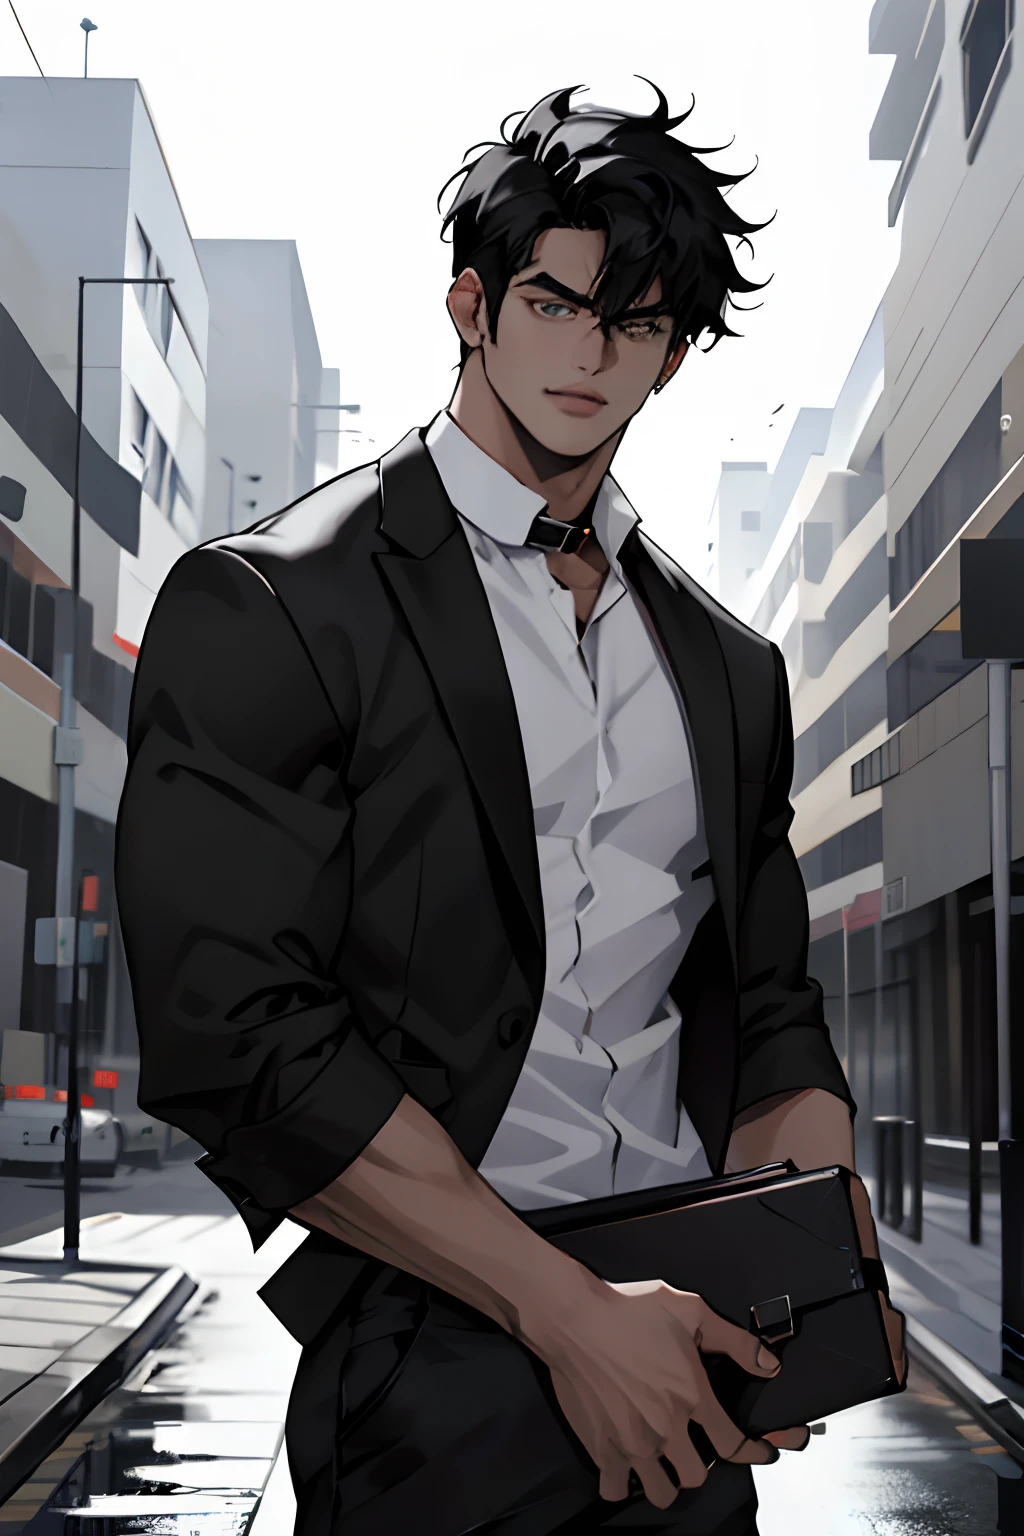 1, [detailed background (campus, university, library)], black hair, dark hair, short black hair, Korean hairstyle, Clean hairstyle, Slim and muscular man, Alpha male, masculine masculine, tall male ((Man wears a black suit, black pant, Specifications)) Holding briefcase)), Correct tips, anatomy correct, handsome, Eye details, Beautiful eyes, delicate eyes, grey eyes, wide chest, wide shoulders, tiny waist, long legs, serious face